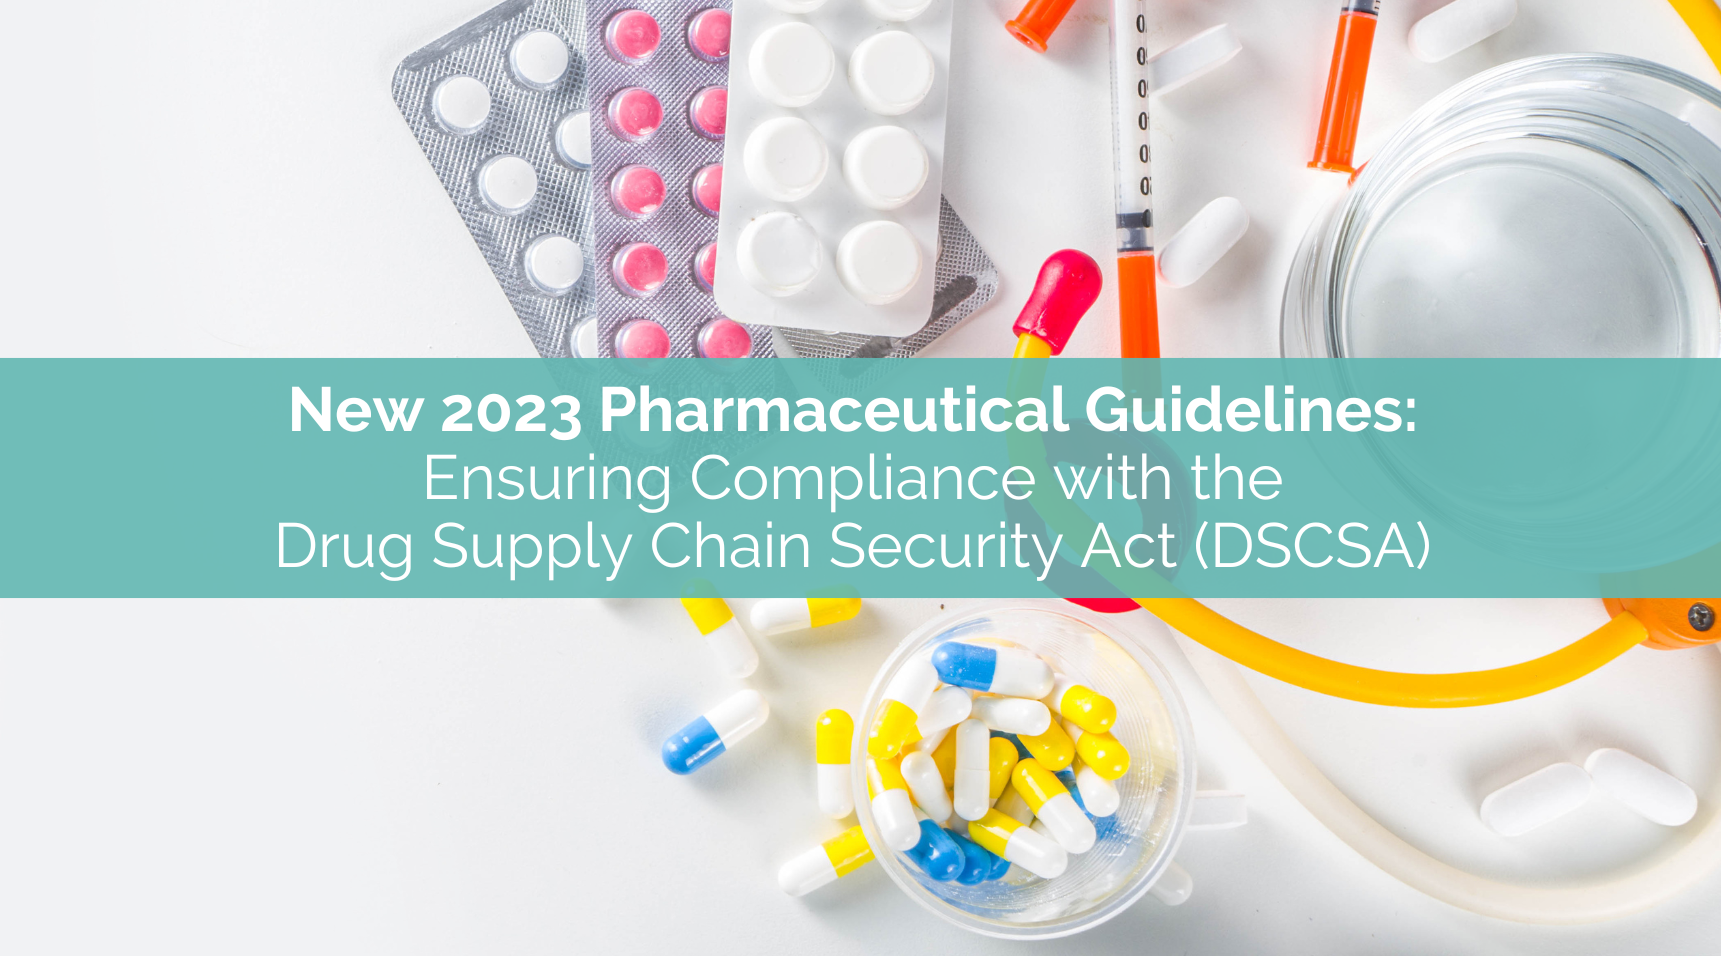 New 2023 Pharmaceutical Guidelines: Ensuring Compliance with the Drug Supply Chain Security Act (DSCSA)